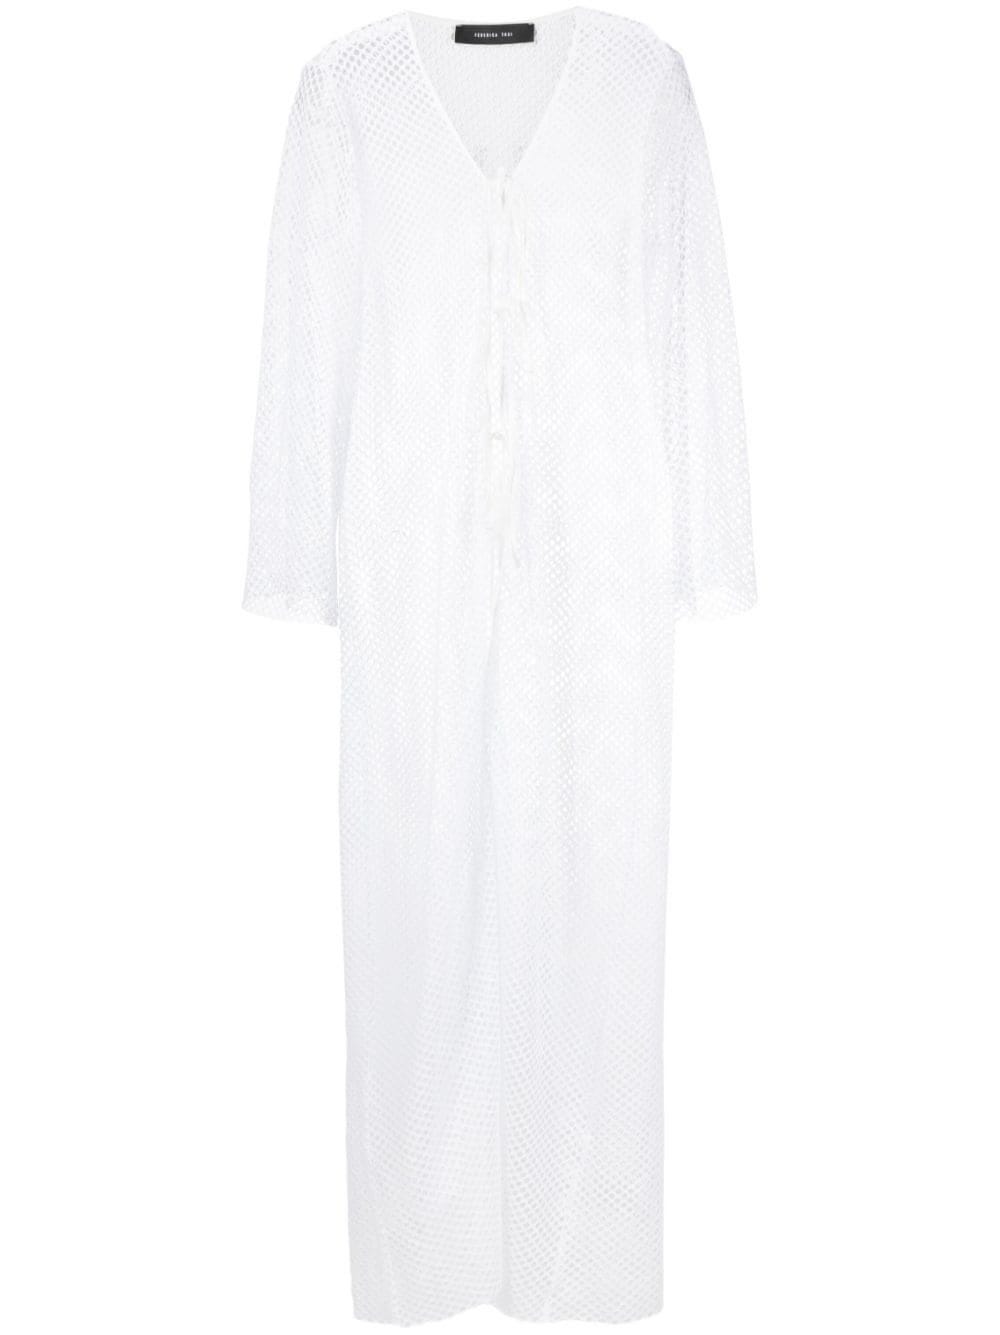 FEDERICA TOSI WHITE LONG DRESS WITH KNOTS